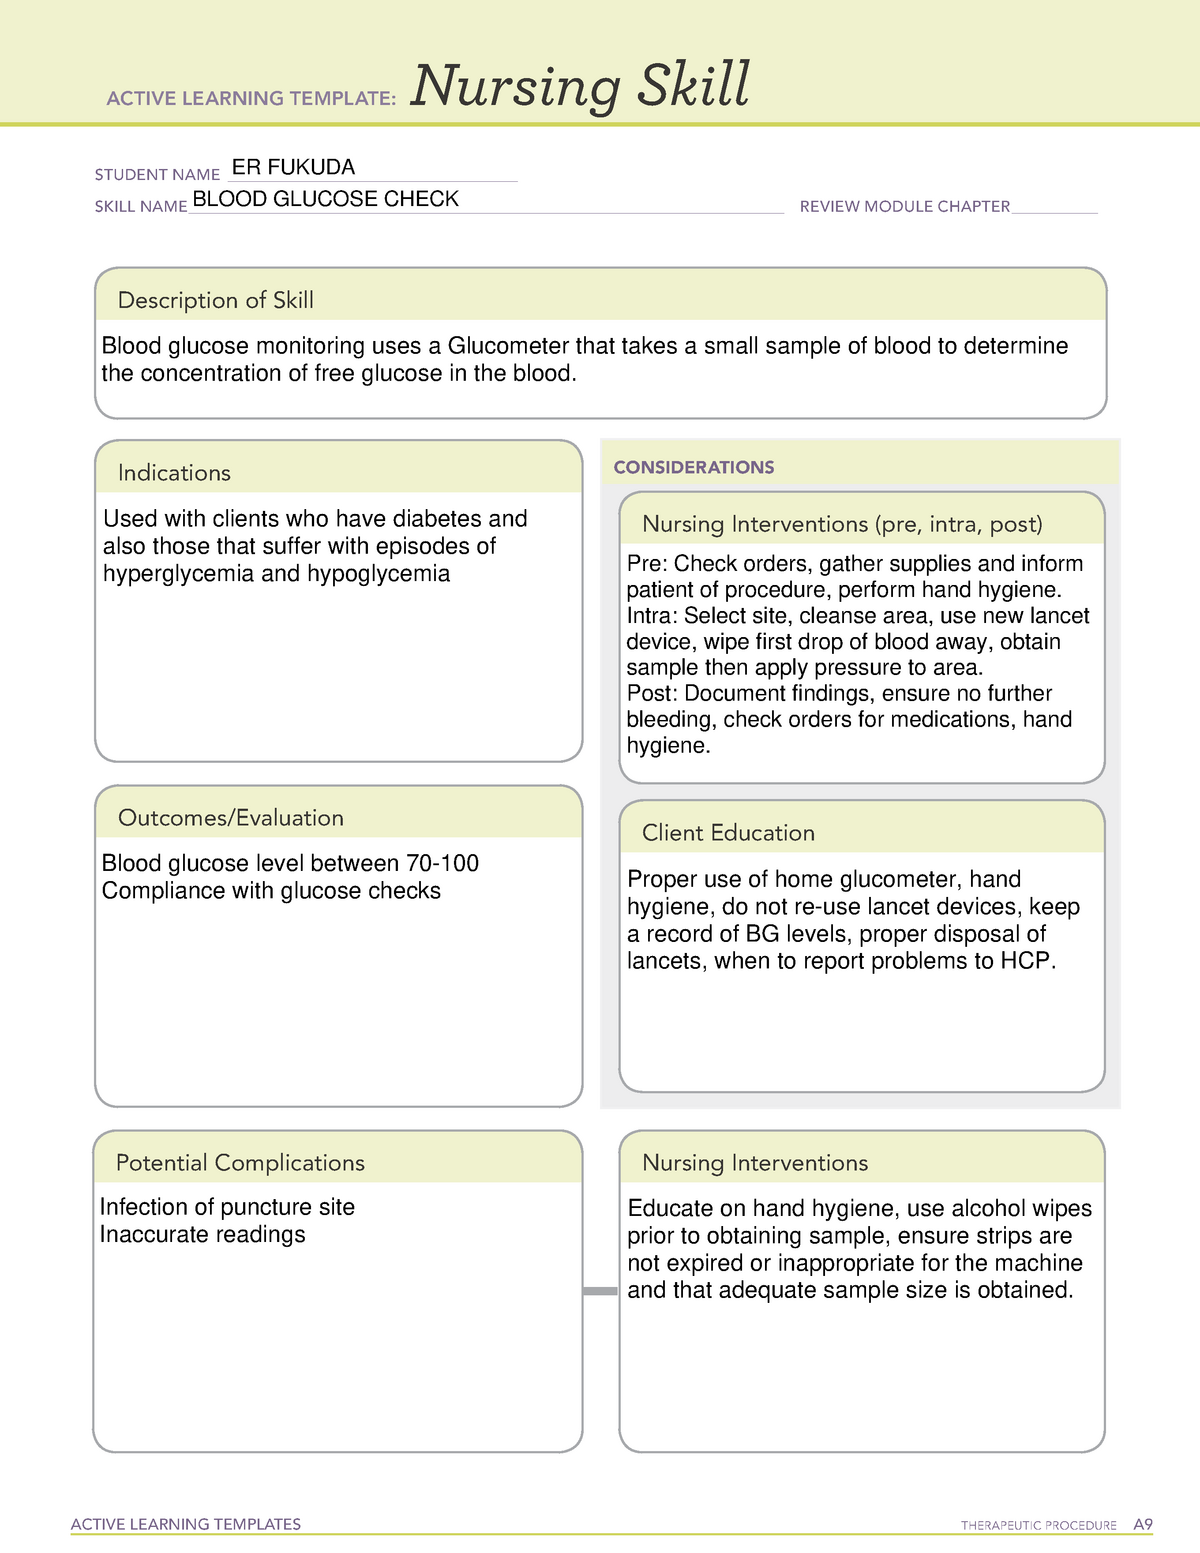 Active Learning Template Diagnostic Procedure